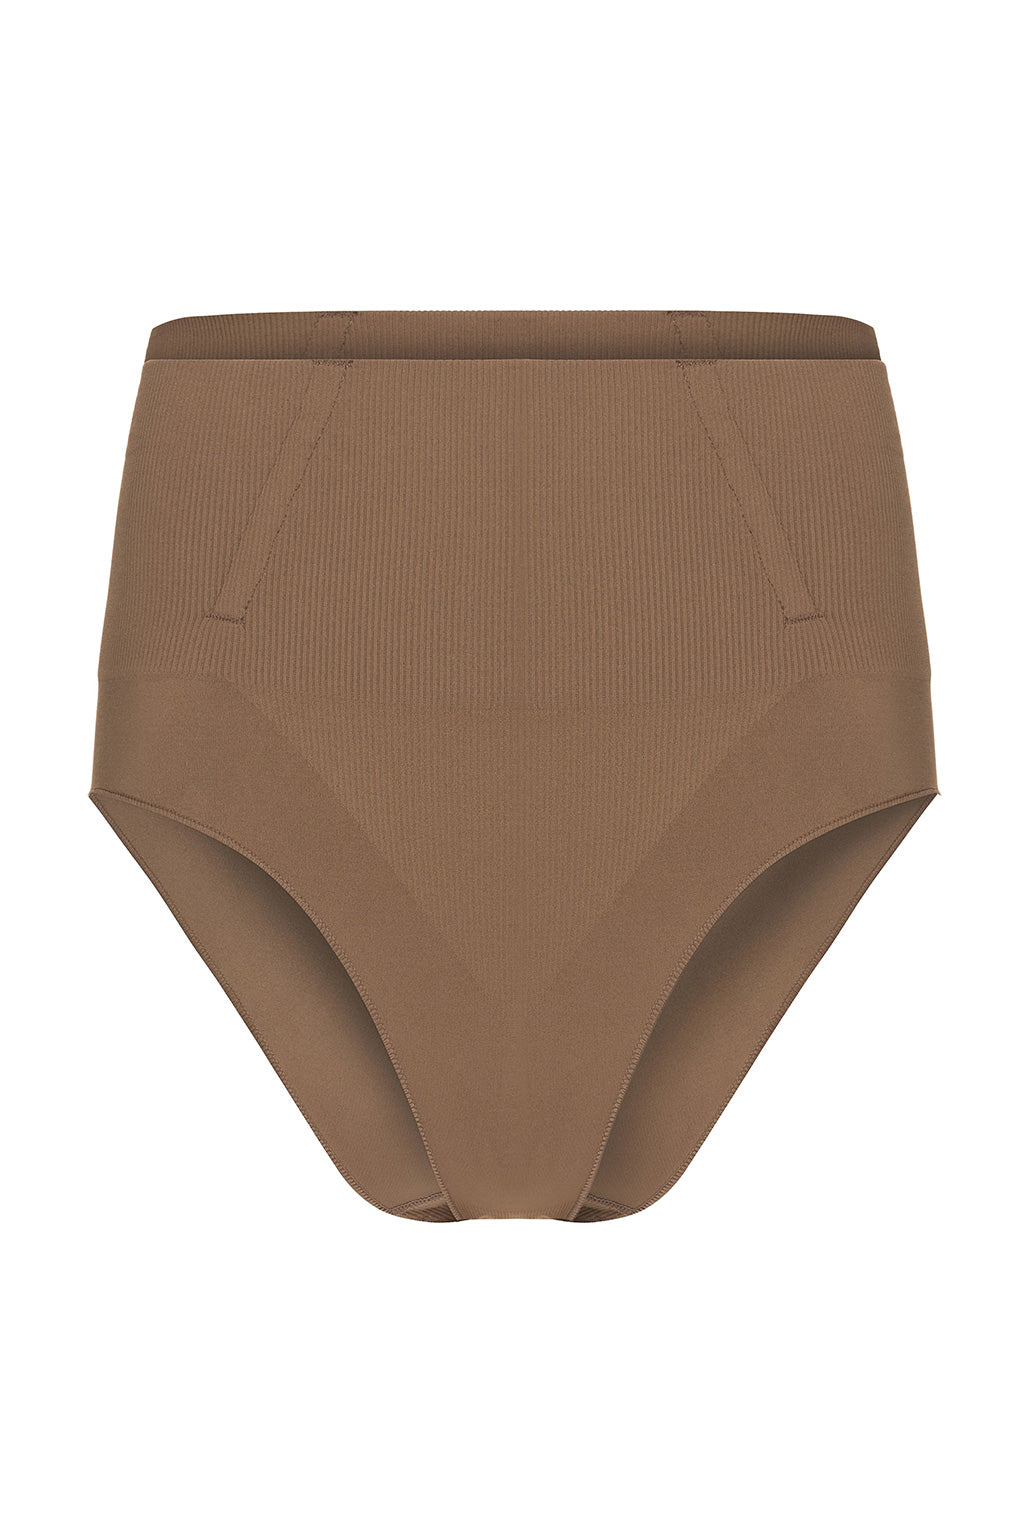 CO'COON PLUS THERMAL ZIPPER GIRDLE PANTY REF #4505